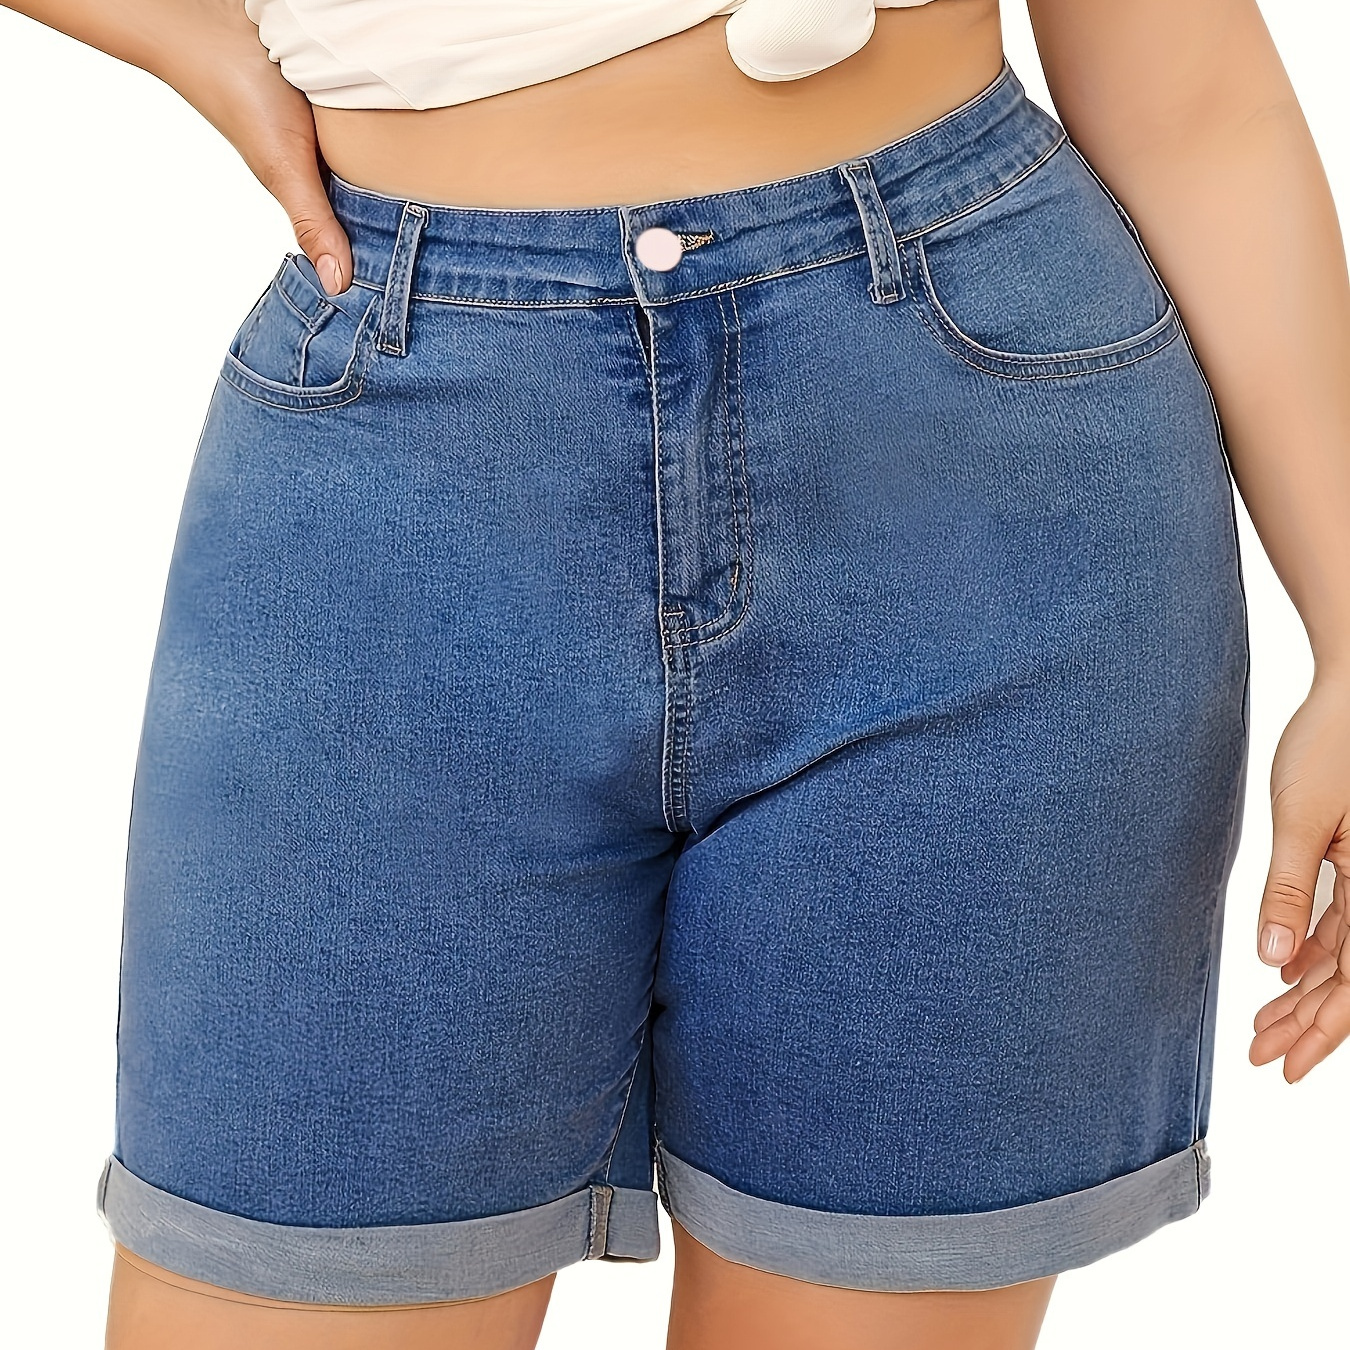 

Women's Plus Size Casual Denim Shorts, High Waist, Stretch, Summer Folded Roll Up Hem Jean Shorts, Relaxed Fit